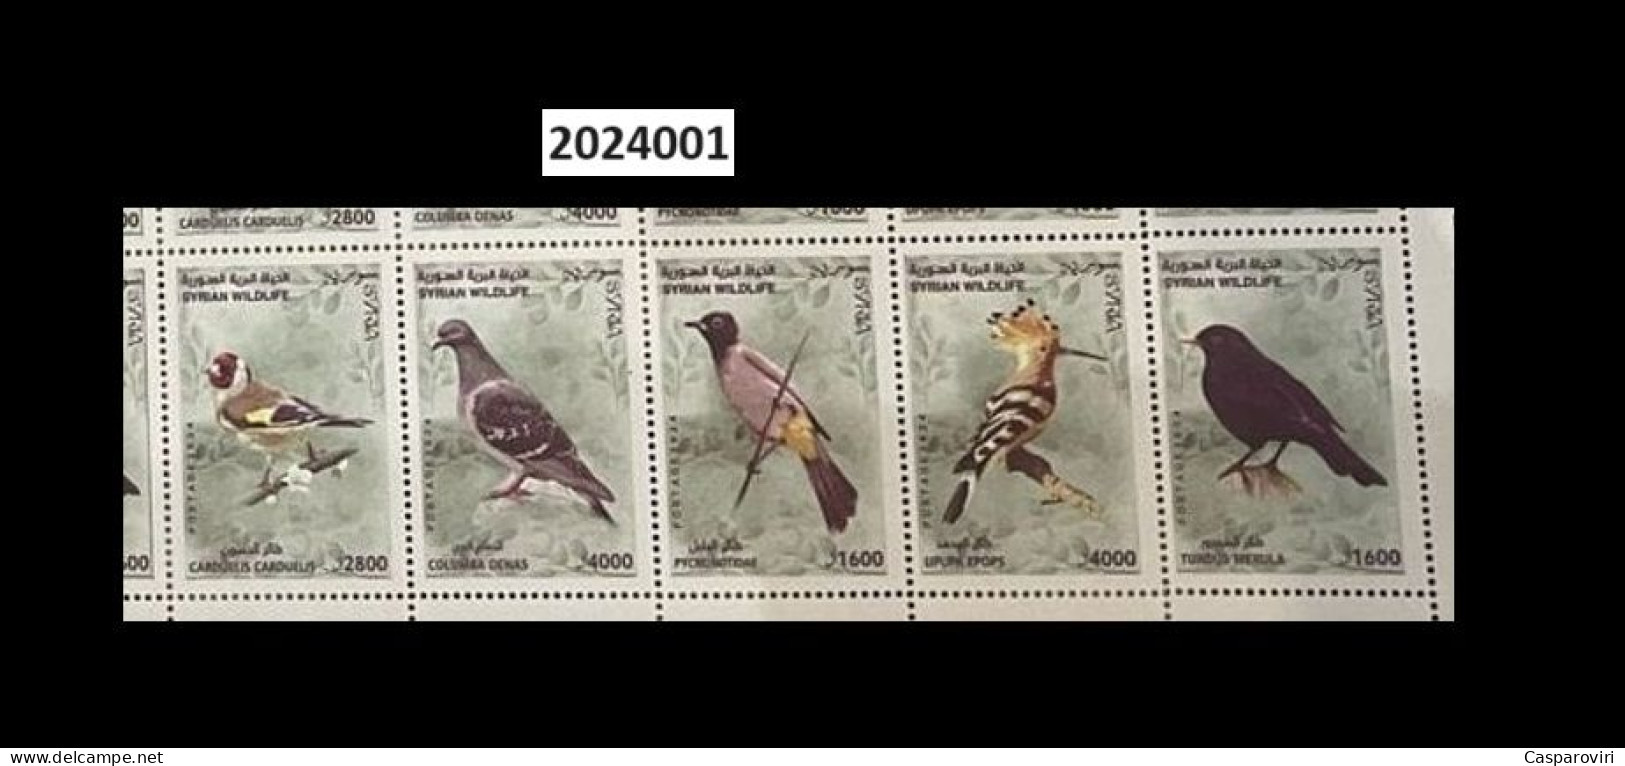 2024401; Syria; 2024; Strip Of 5 Stamps On Envelope; Syrian Wildlife; Syrian Birds; 5 Different Stamps; Canceled - Syrien